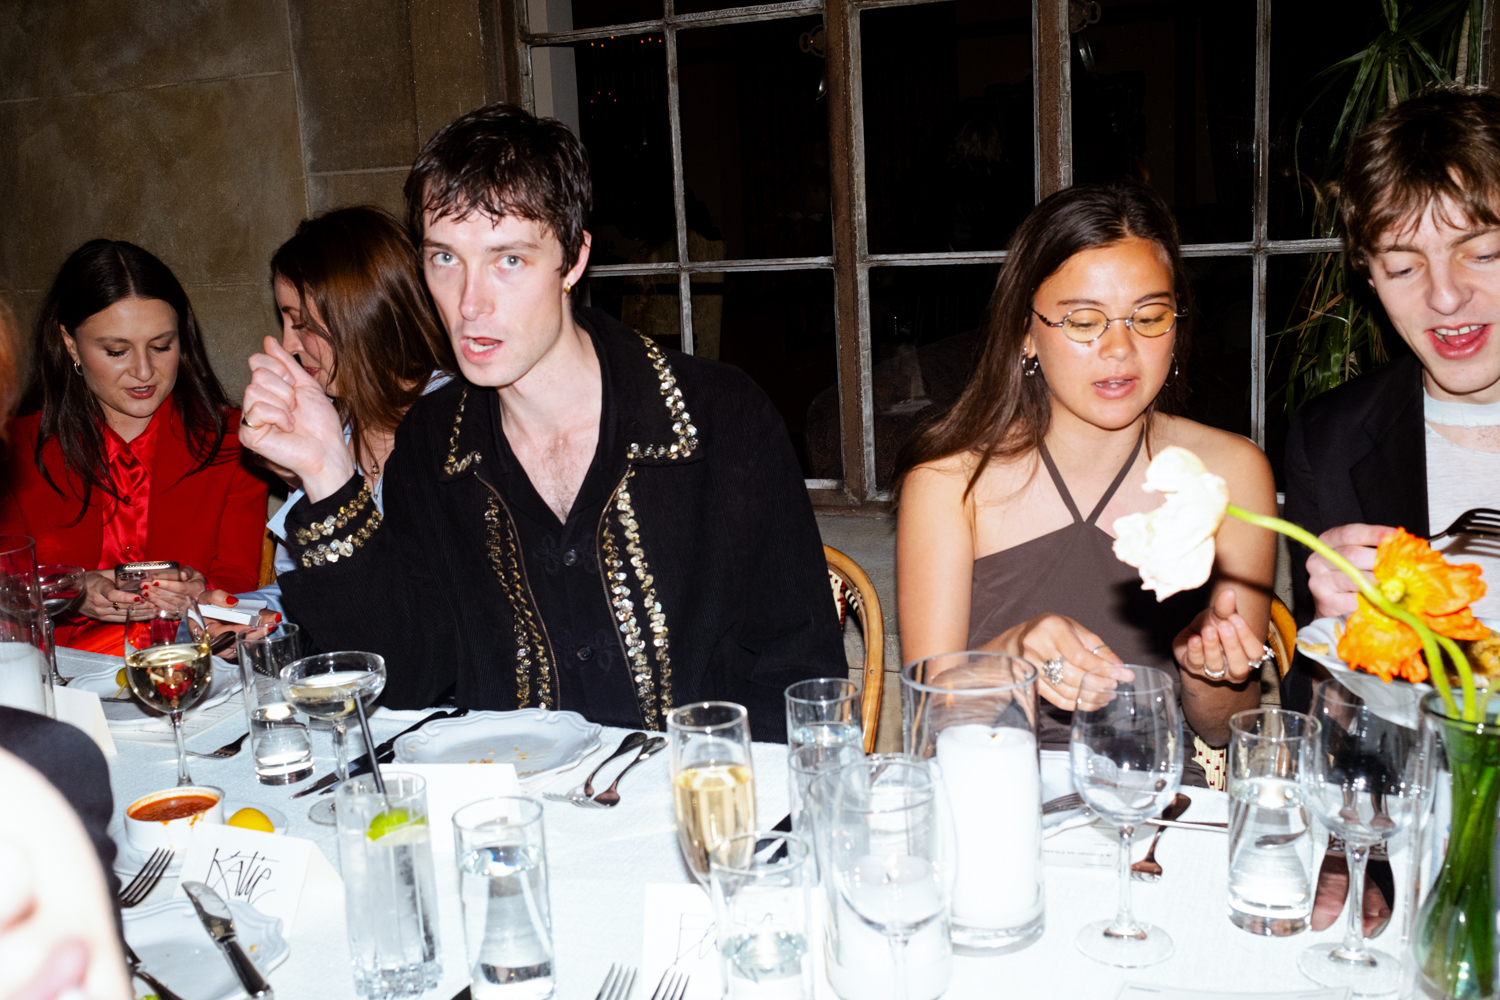 Maison Kitsune pre-grammys dinner hosting musicians at the Chateau Marmont in Los Angeles